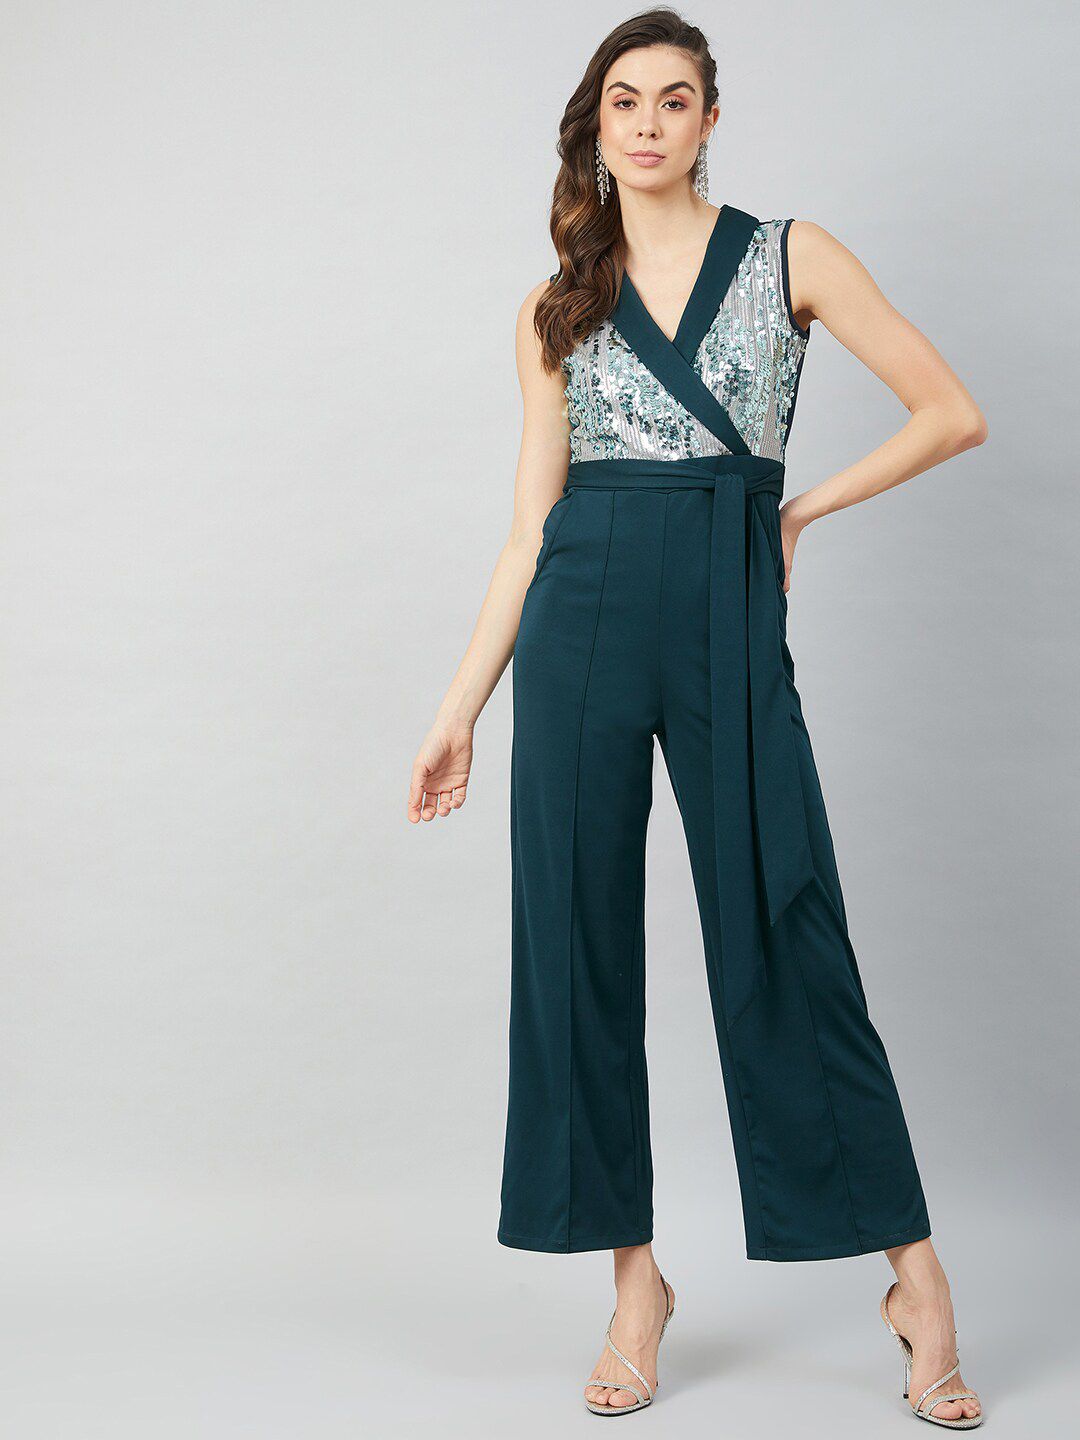 Athena Turquoise Blue & Silver-Toned Basic Jumpsuit with Embellished Price in India